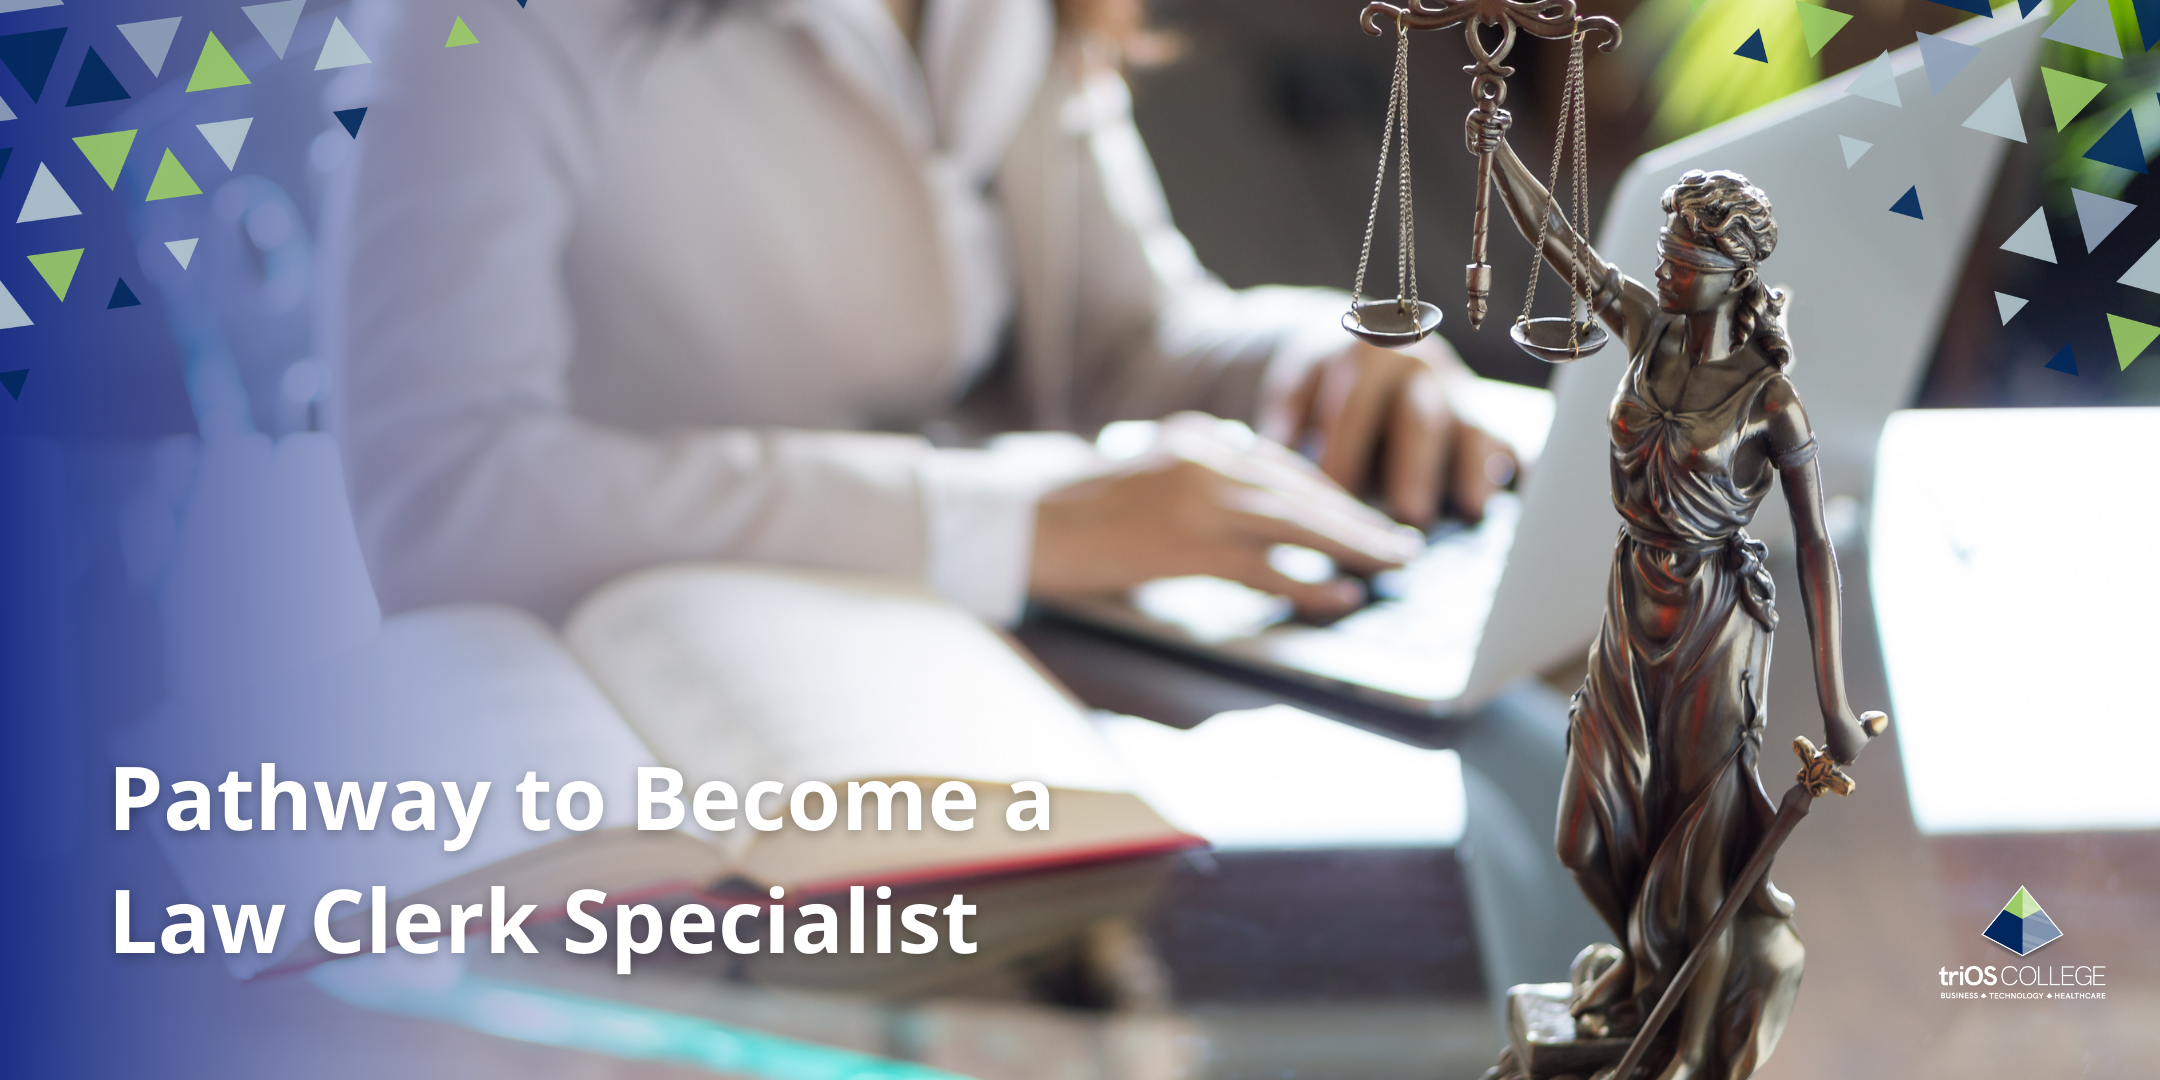 Pathway to Become a Law Clerk Specialist featured image